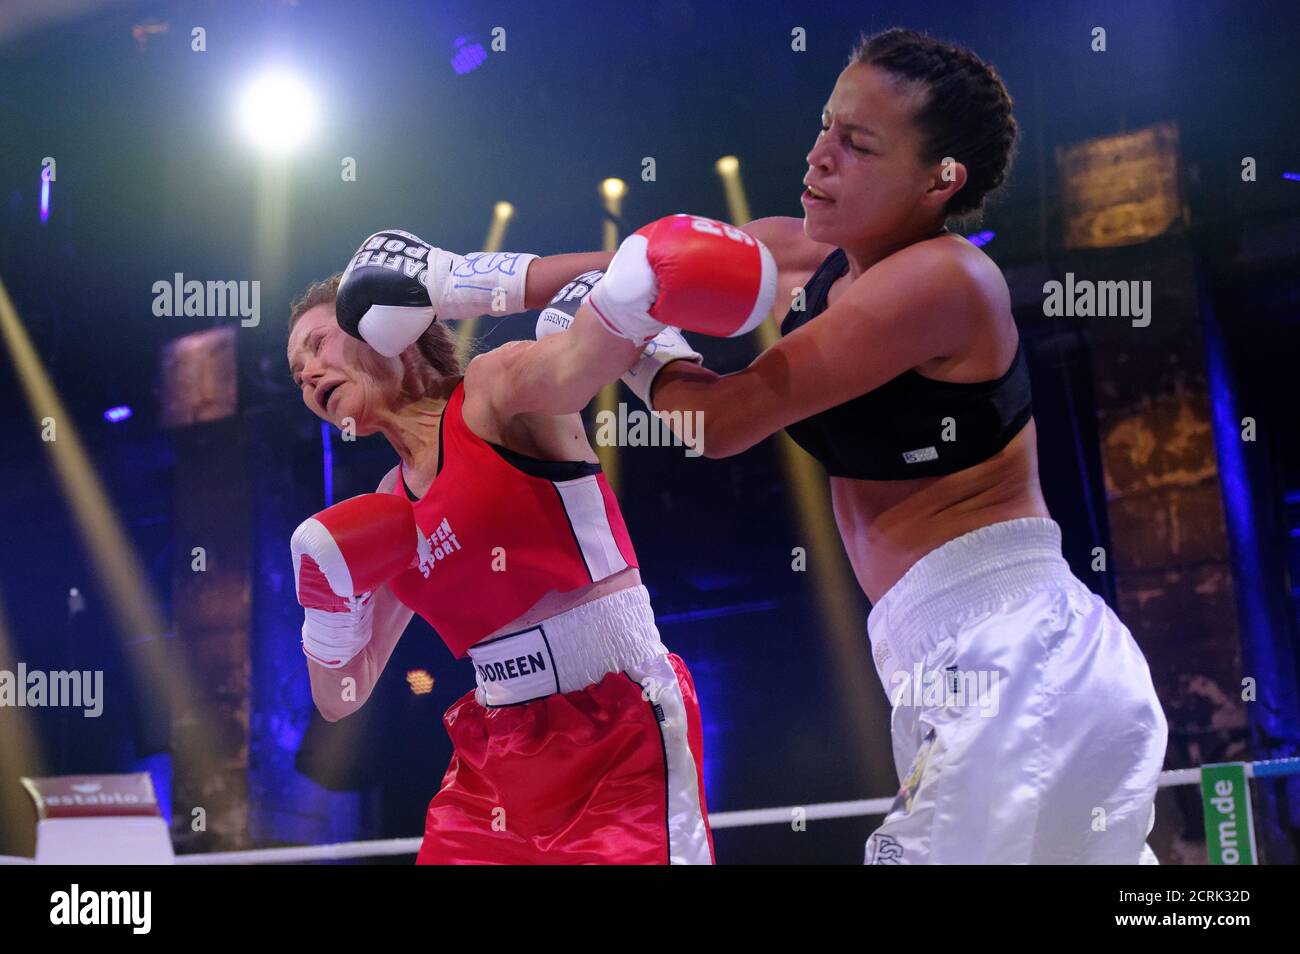 Cologne, Germany. 18th Sep, 2020. Actress Doreen Dietel (l) and model  Gisele Oppermann (r) fight in the boxing ring during the TV show "Das große  Sat.1 Promiboxen". Credit: Henning Kaiser/dpa/Alamy Live News